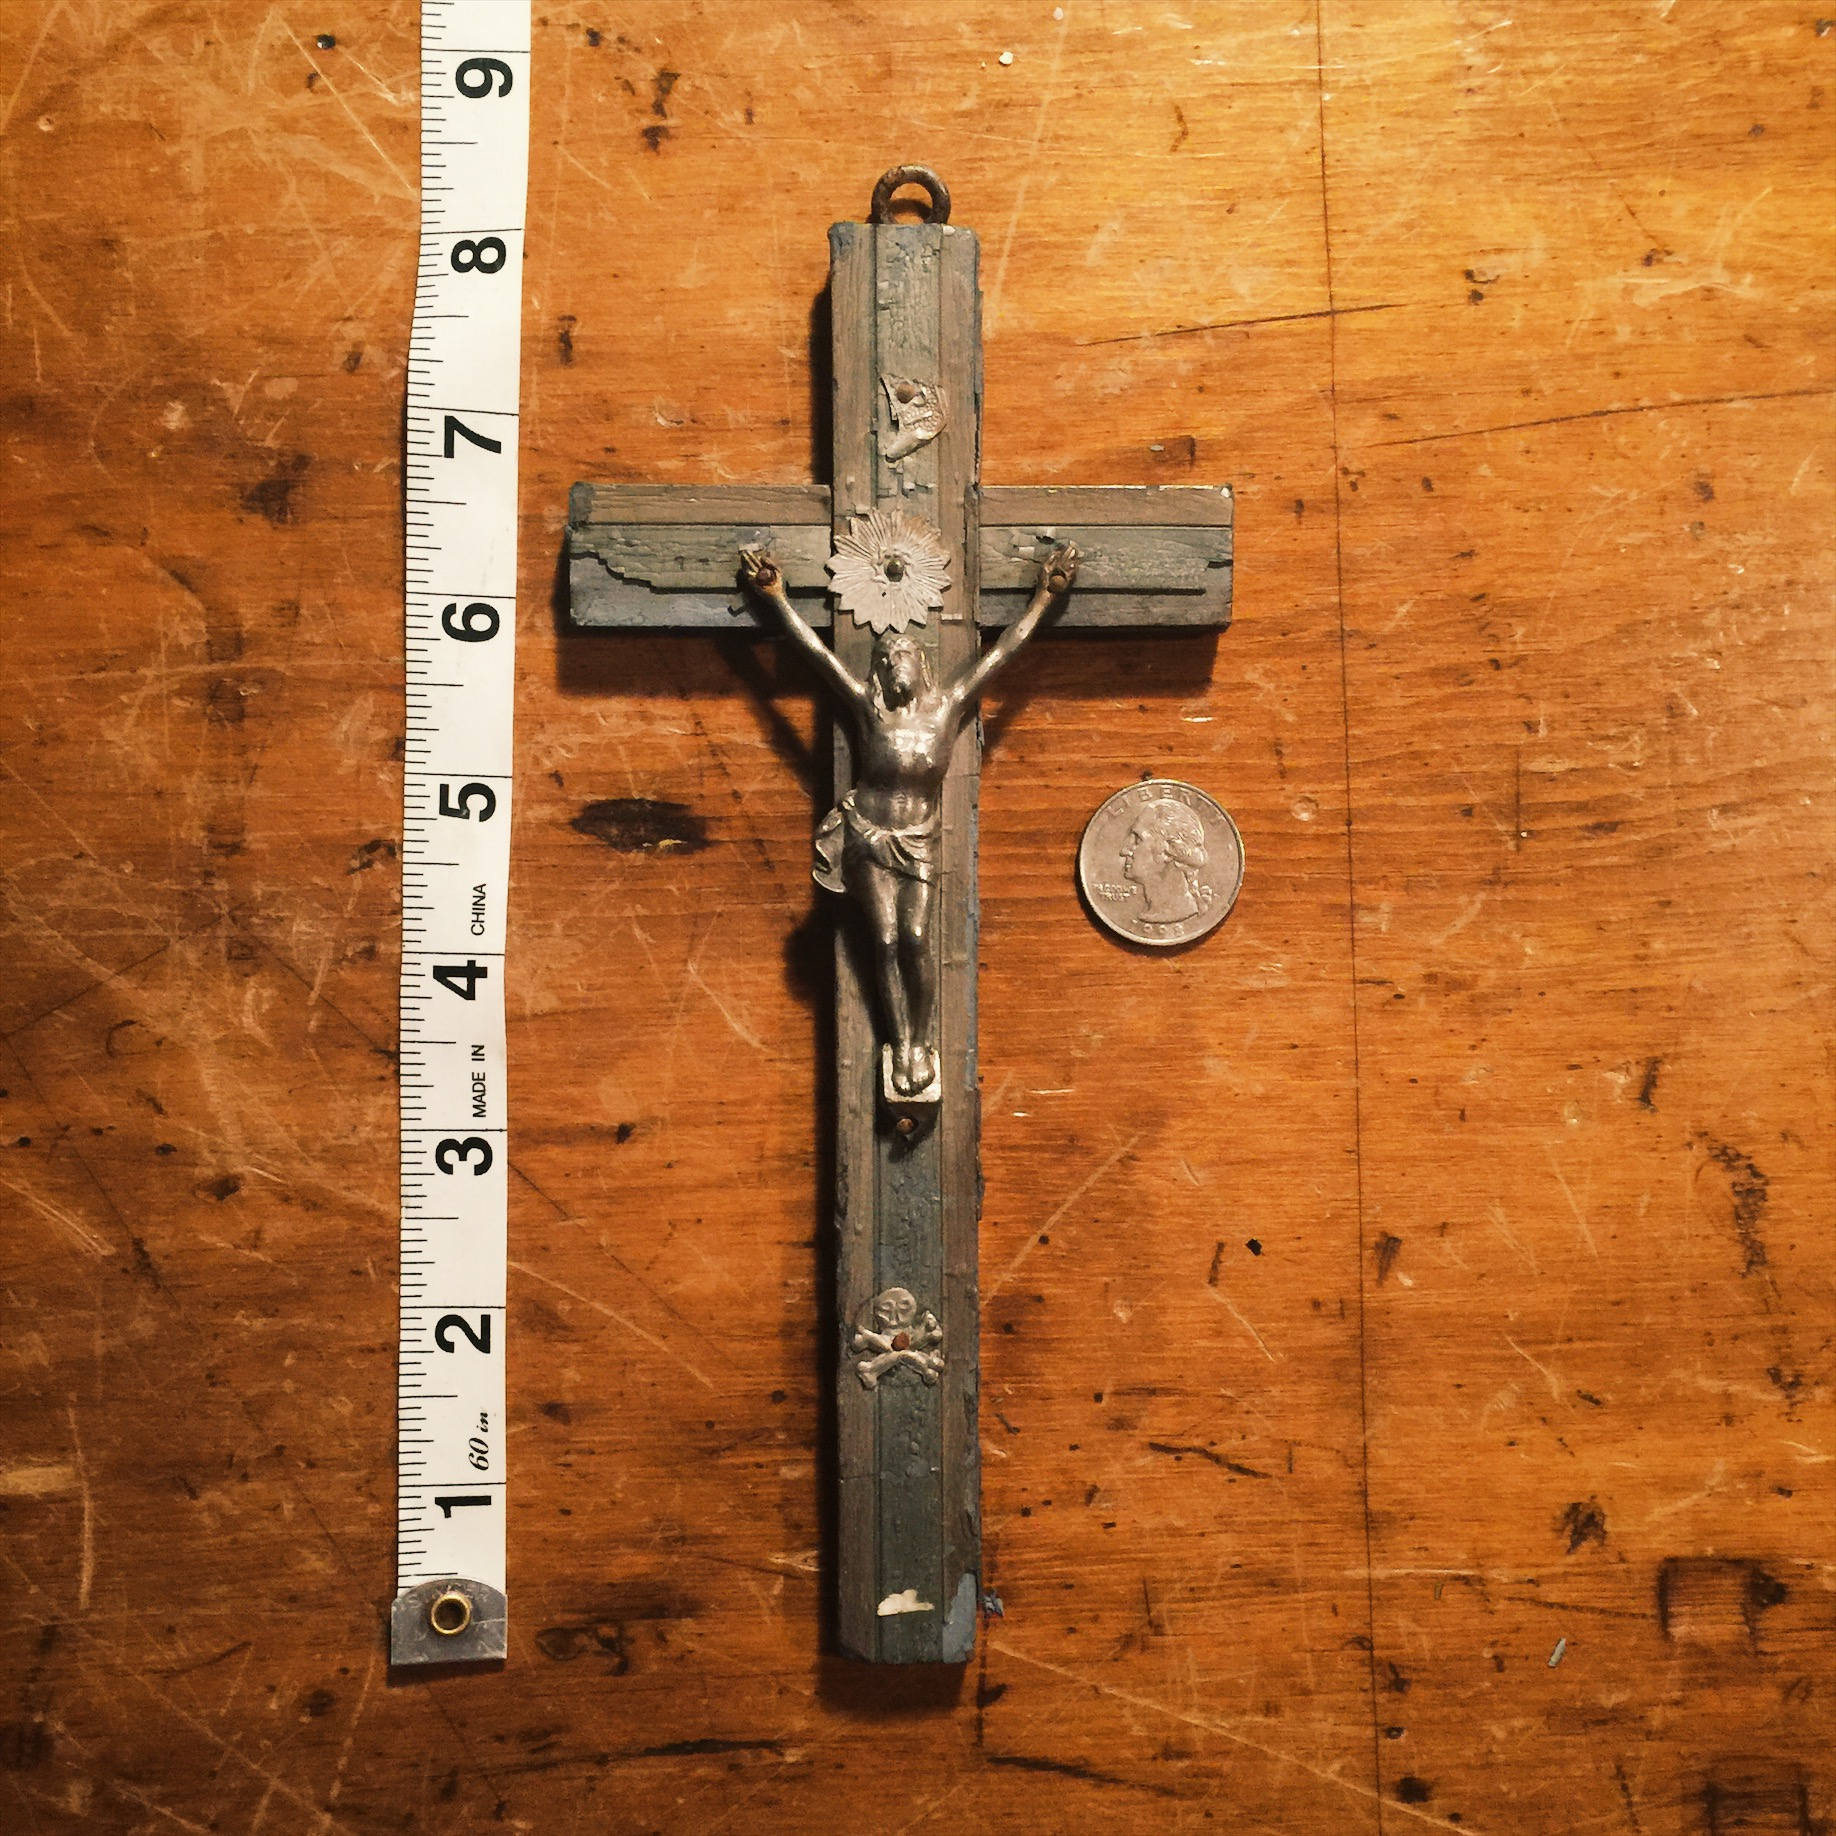 Antique Crucifix with Skull and Crossbones - Inlay Wood - Turn of the Century - Priest Nuns Crucifix - Religious Wall Art - Rare Crucifix